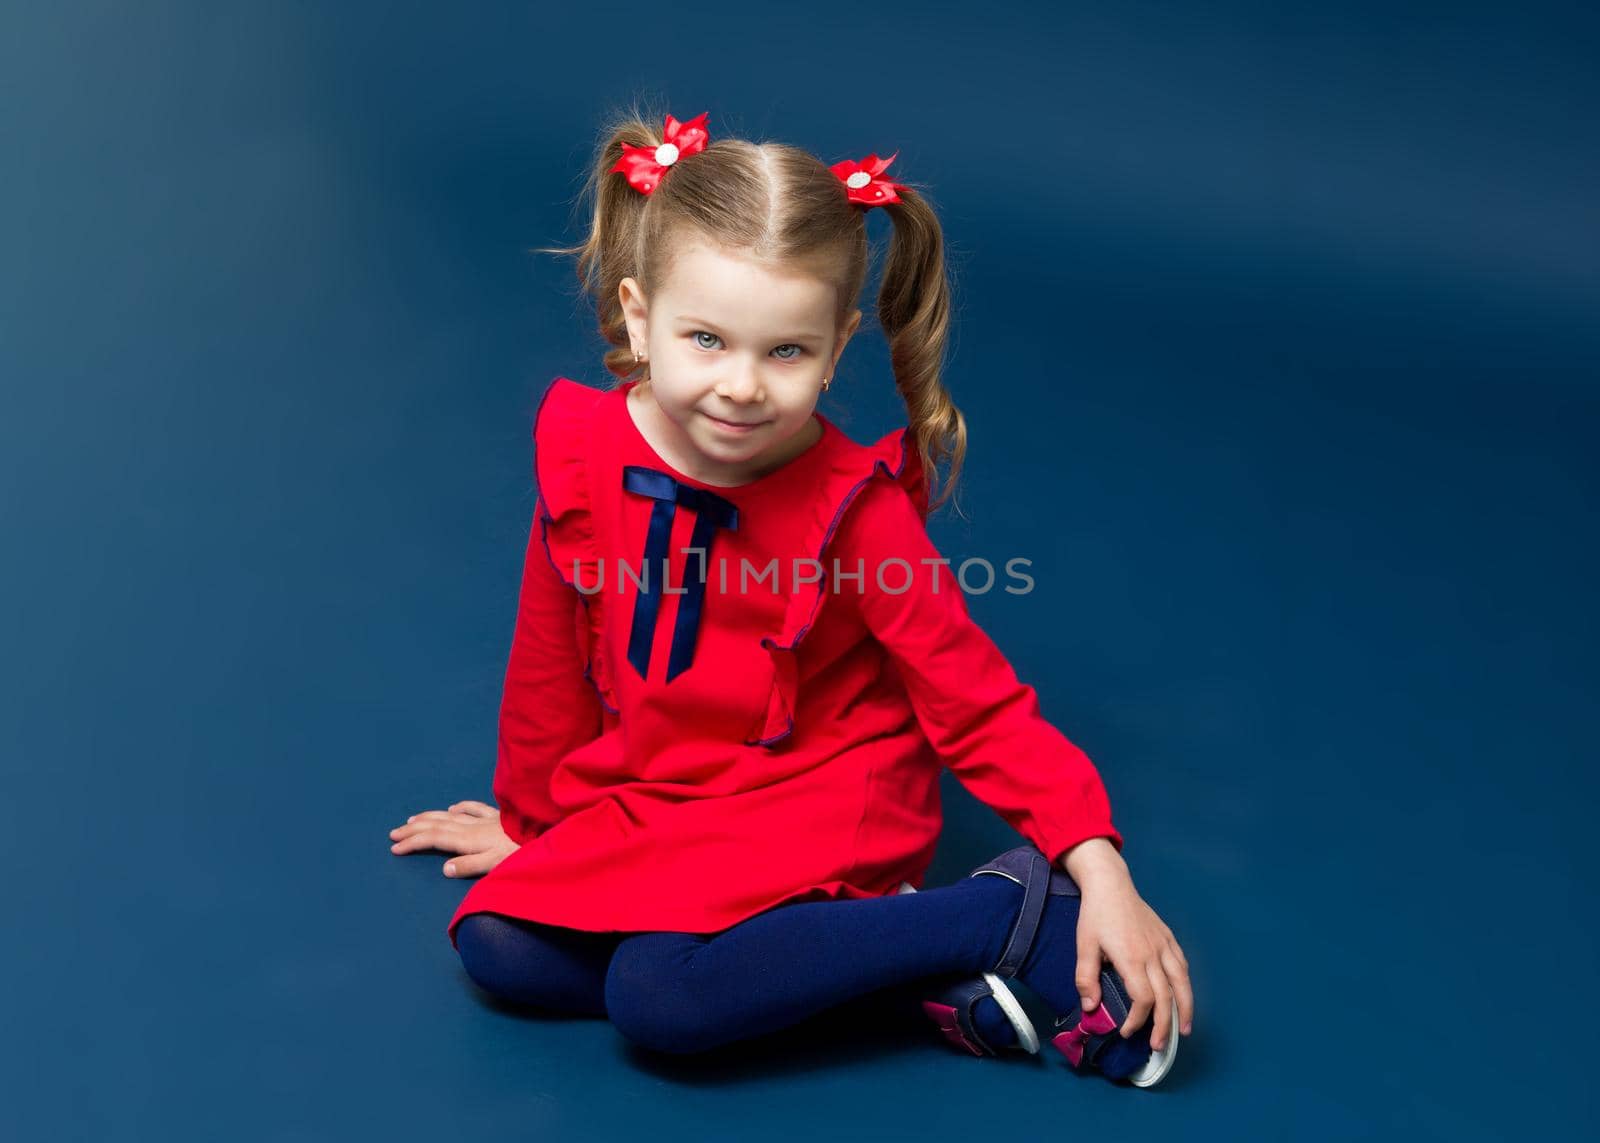 Cute gray eyed girl in red dress sitting on floor. Adorable little girl with cute two ponytails with bows dressed elegant fashionable clothing sitting on floor and looking at something with curiosity